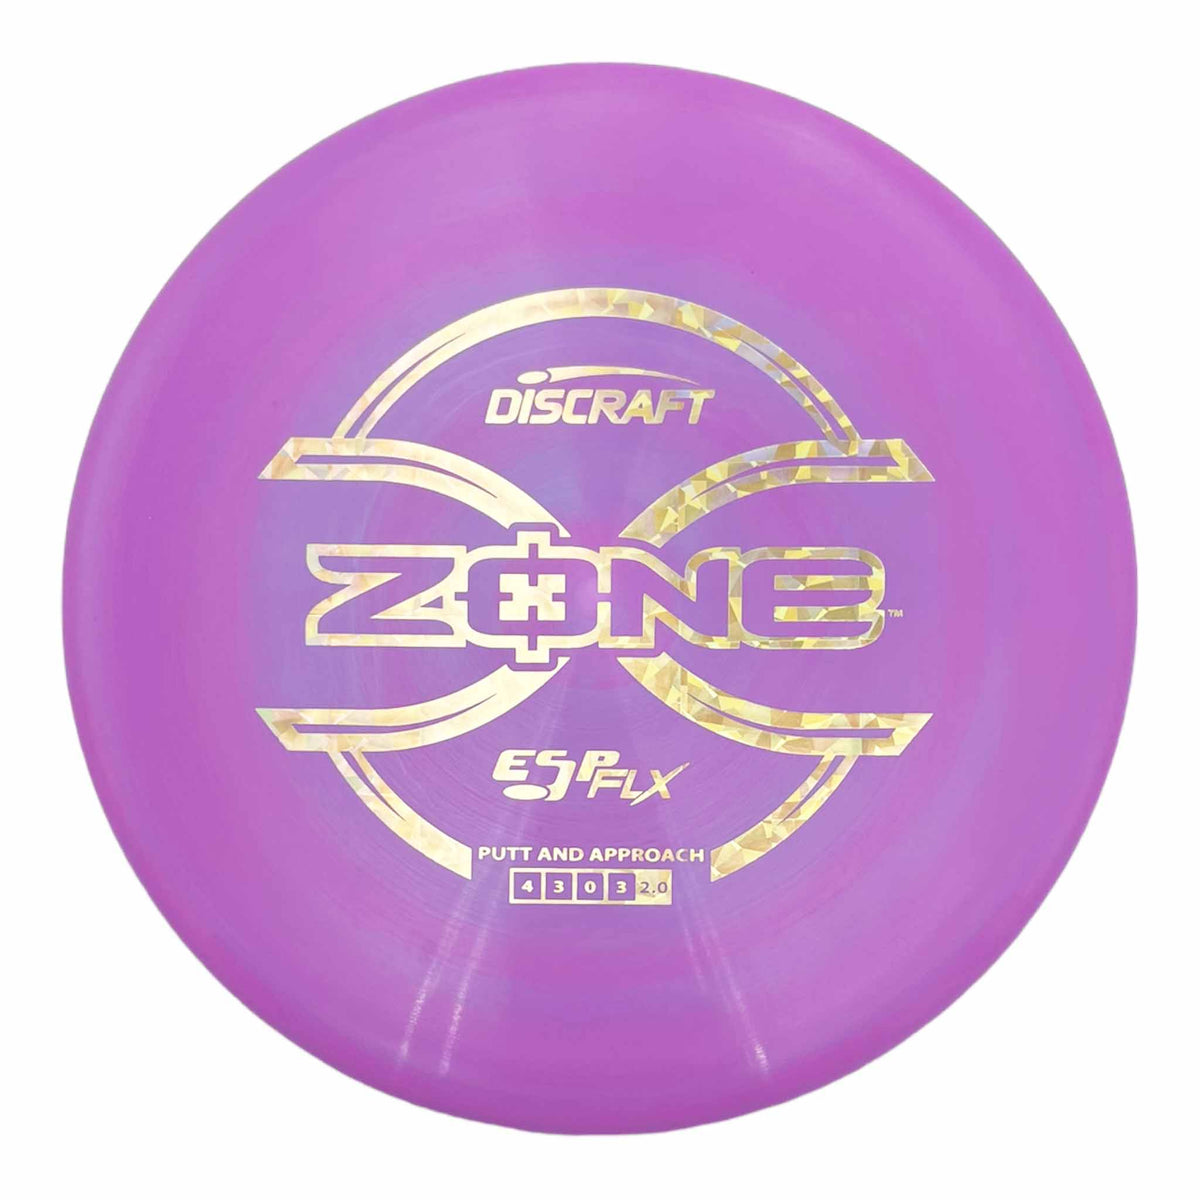 Discraft ESP FLX Zone putter and approach - Pink / Gold